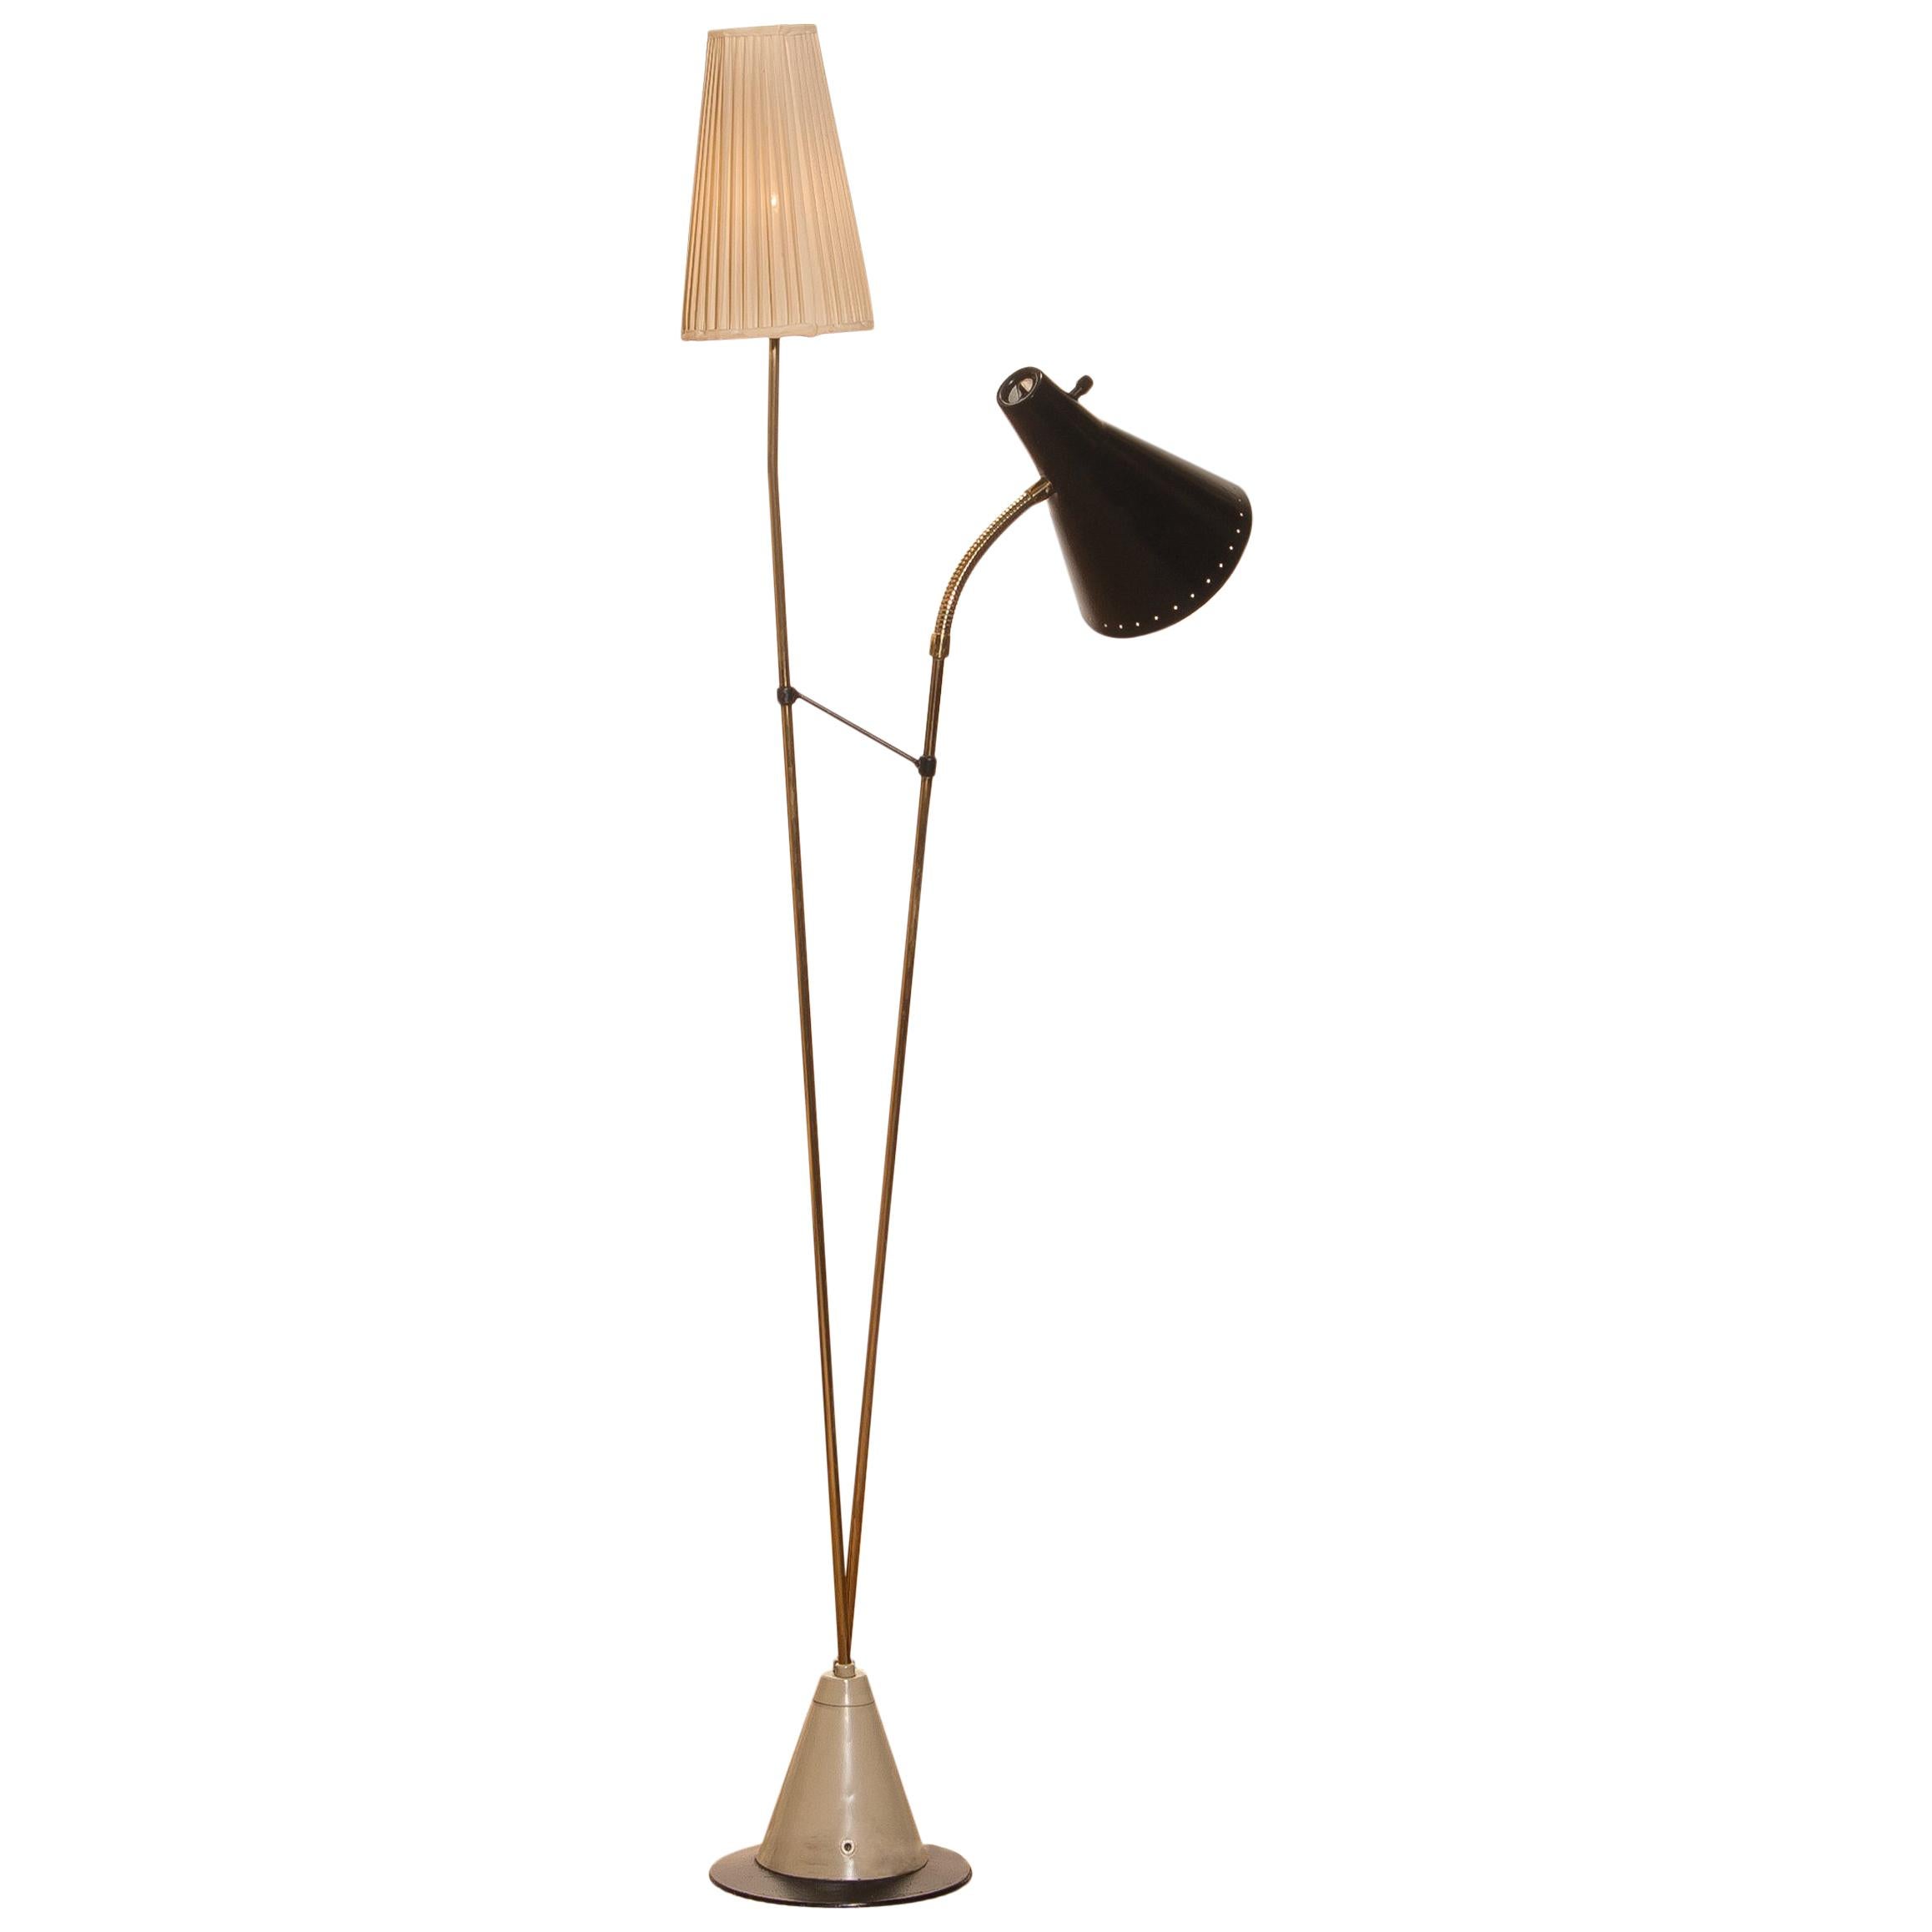 Beautiful floor lamp designed by Hans Bergström for Ateljé Lyktan, Sweden.
This lamp consists of two different shades, one black lacquered metal and one off-white fabric. The stand is made of brass with a beautiful rare foot. It is in a very nice